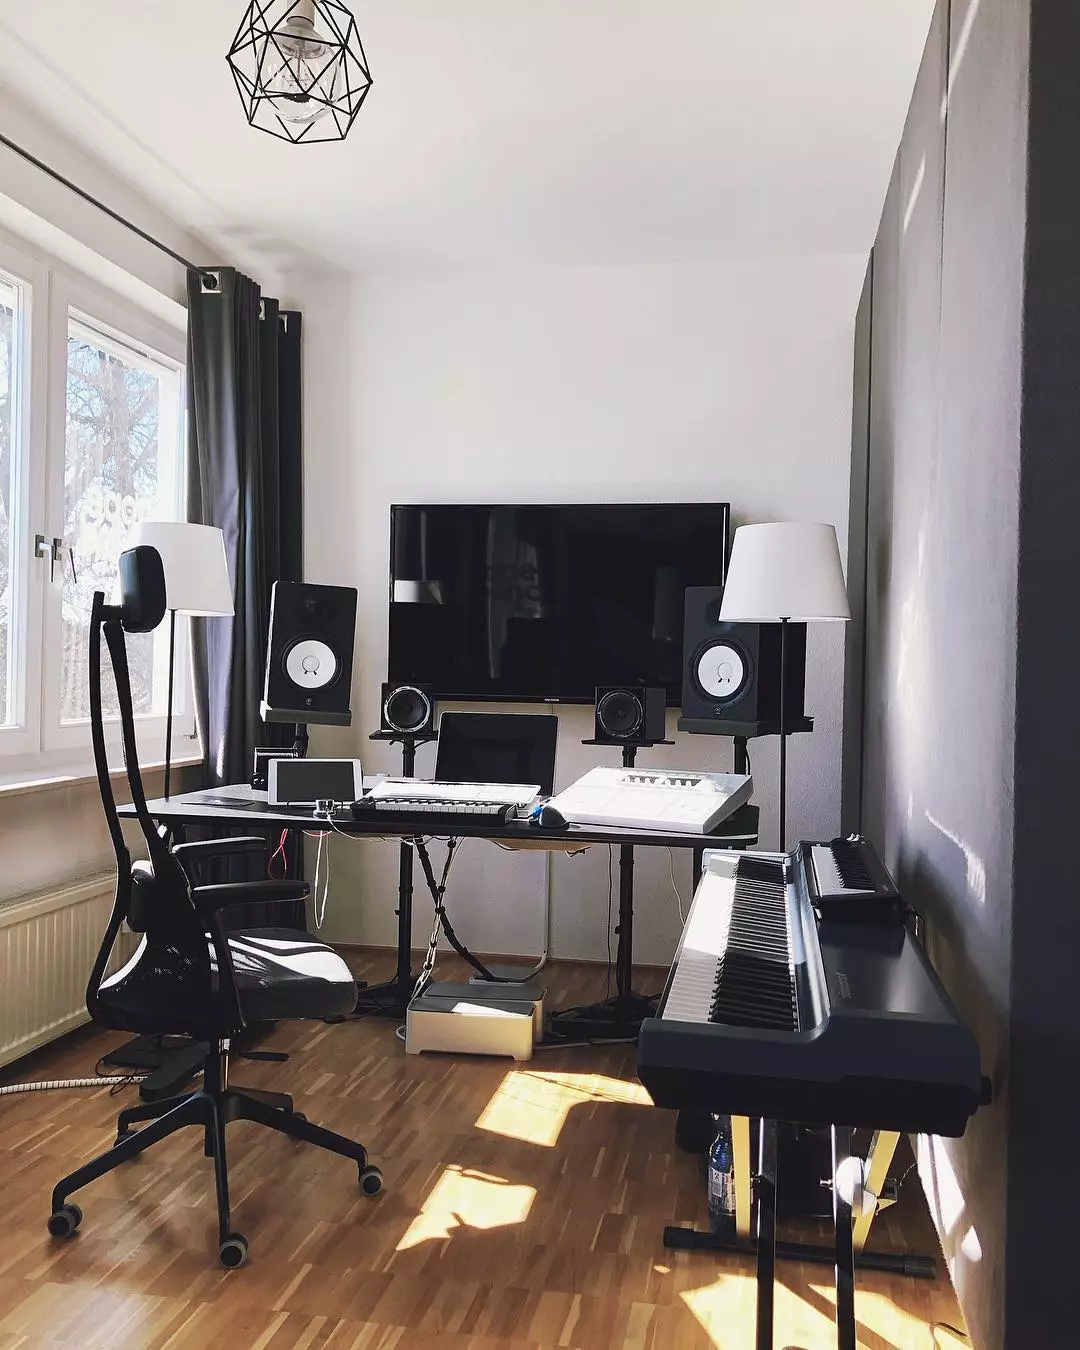 Putting Together a  Studio On a Budget